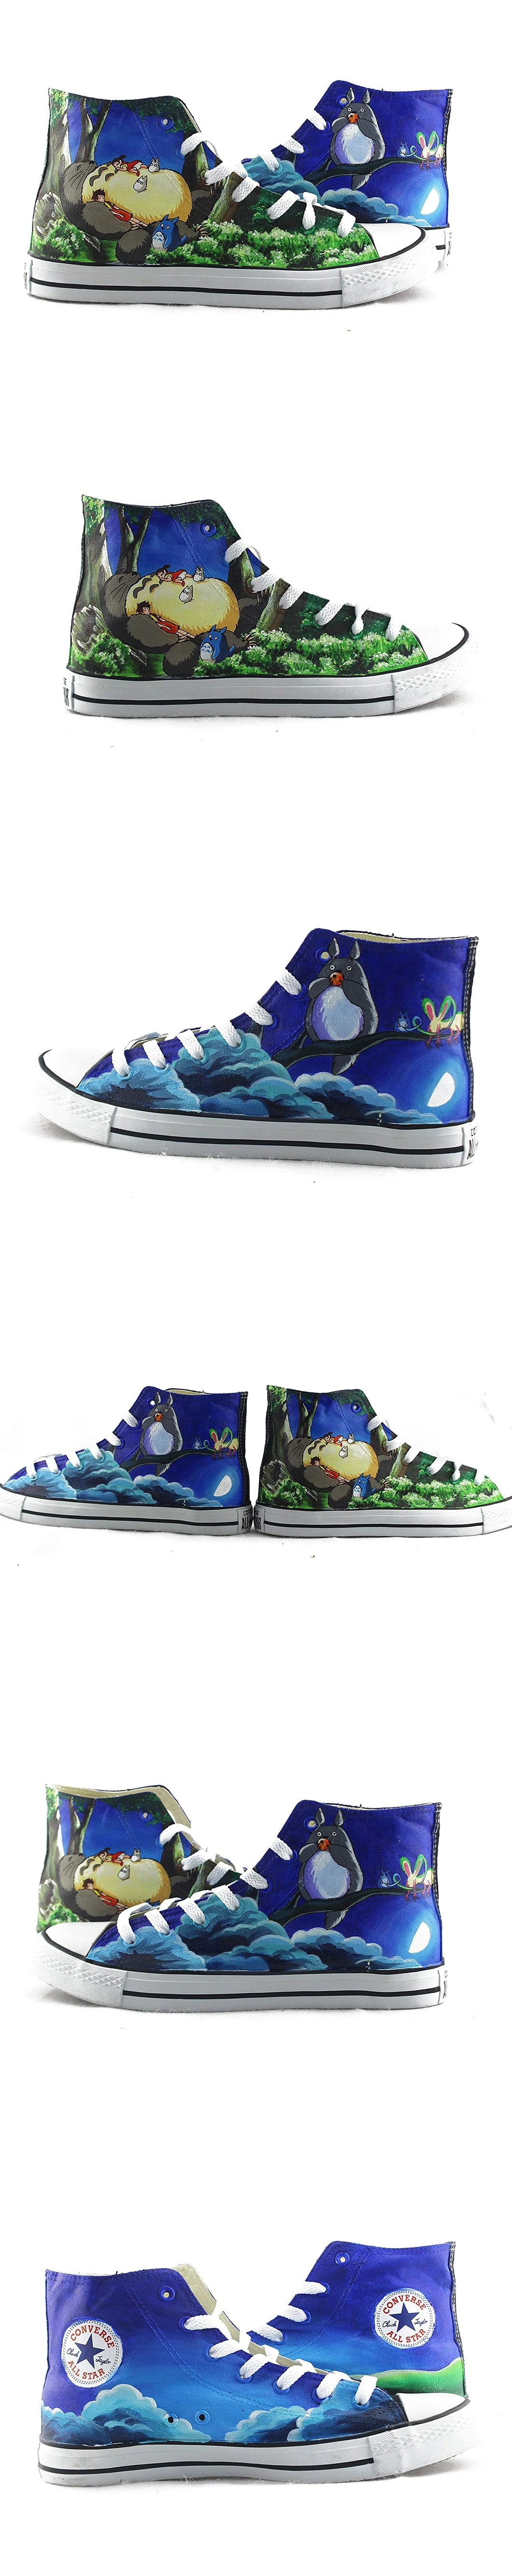 My Neighbor Totoro Shoes, High Tops Anime /Painted Canvas Shoes, Casual Shoes/Sneakers